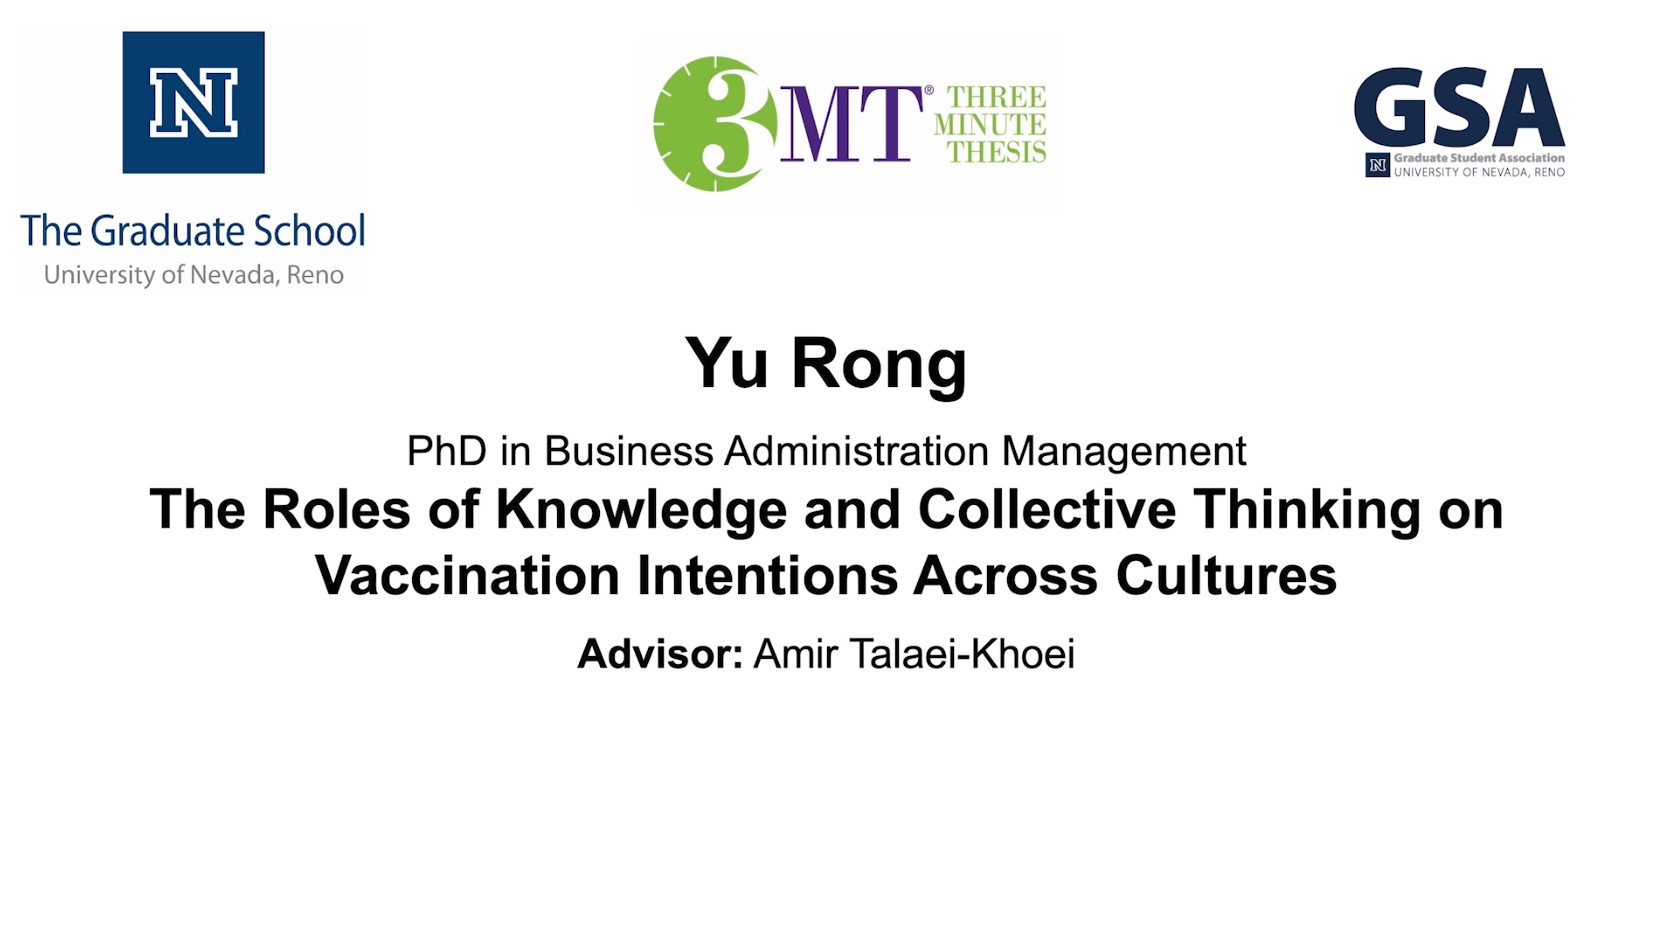 Thumbnail of Yu Rong's title slide